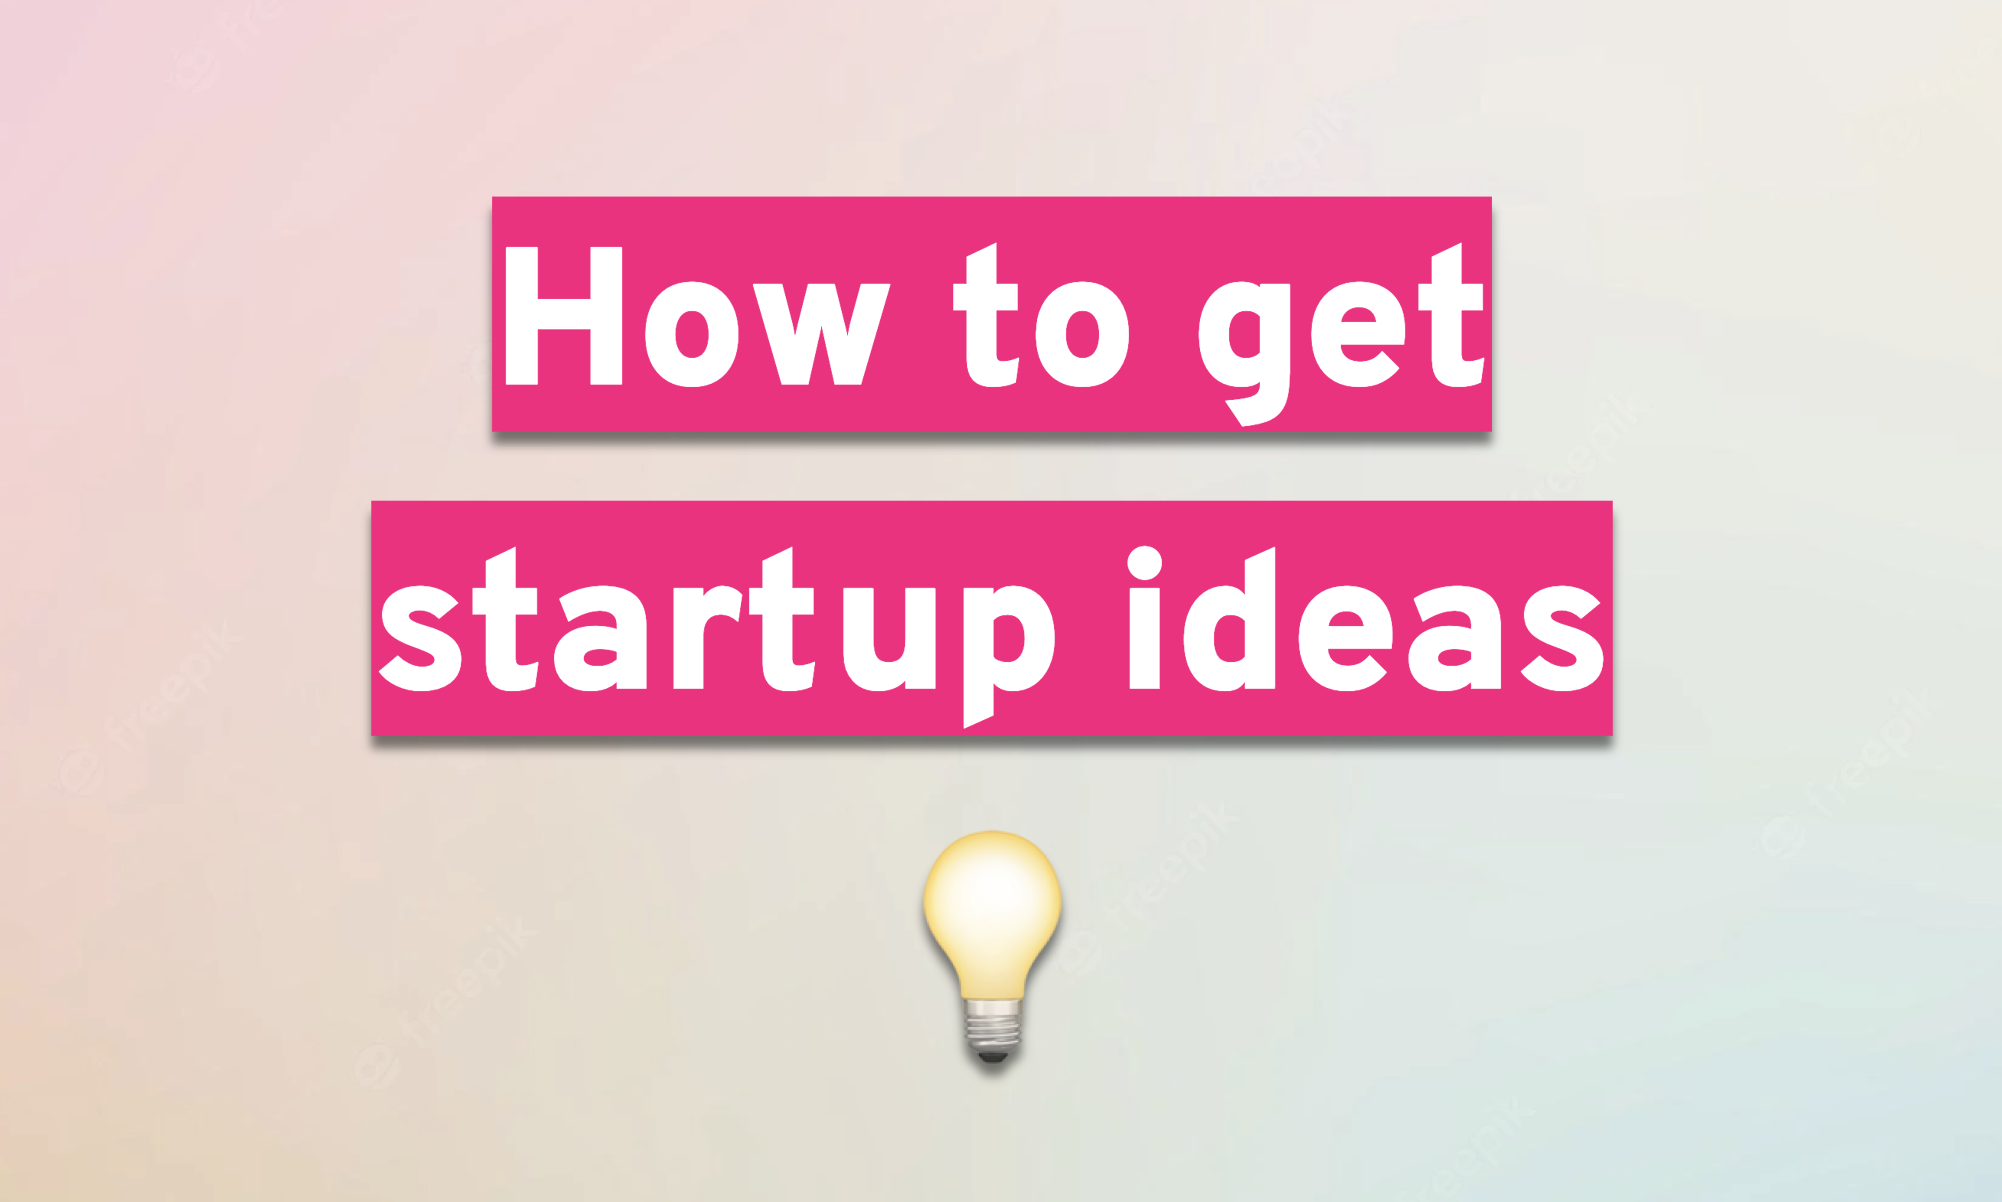 How to get startup ideas